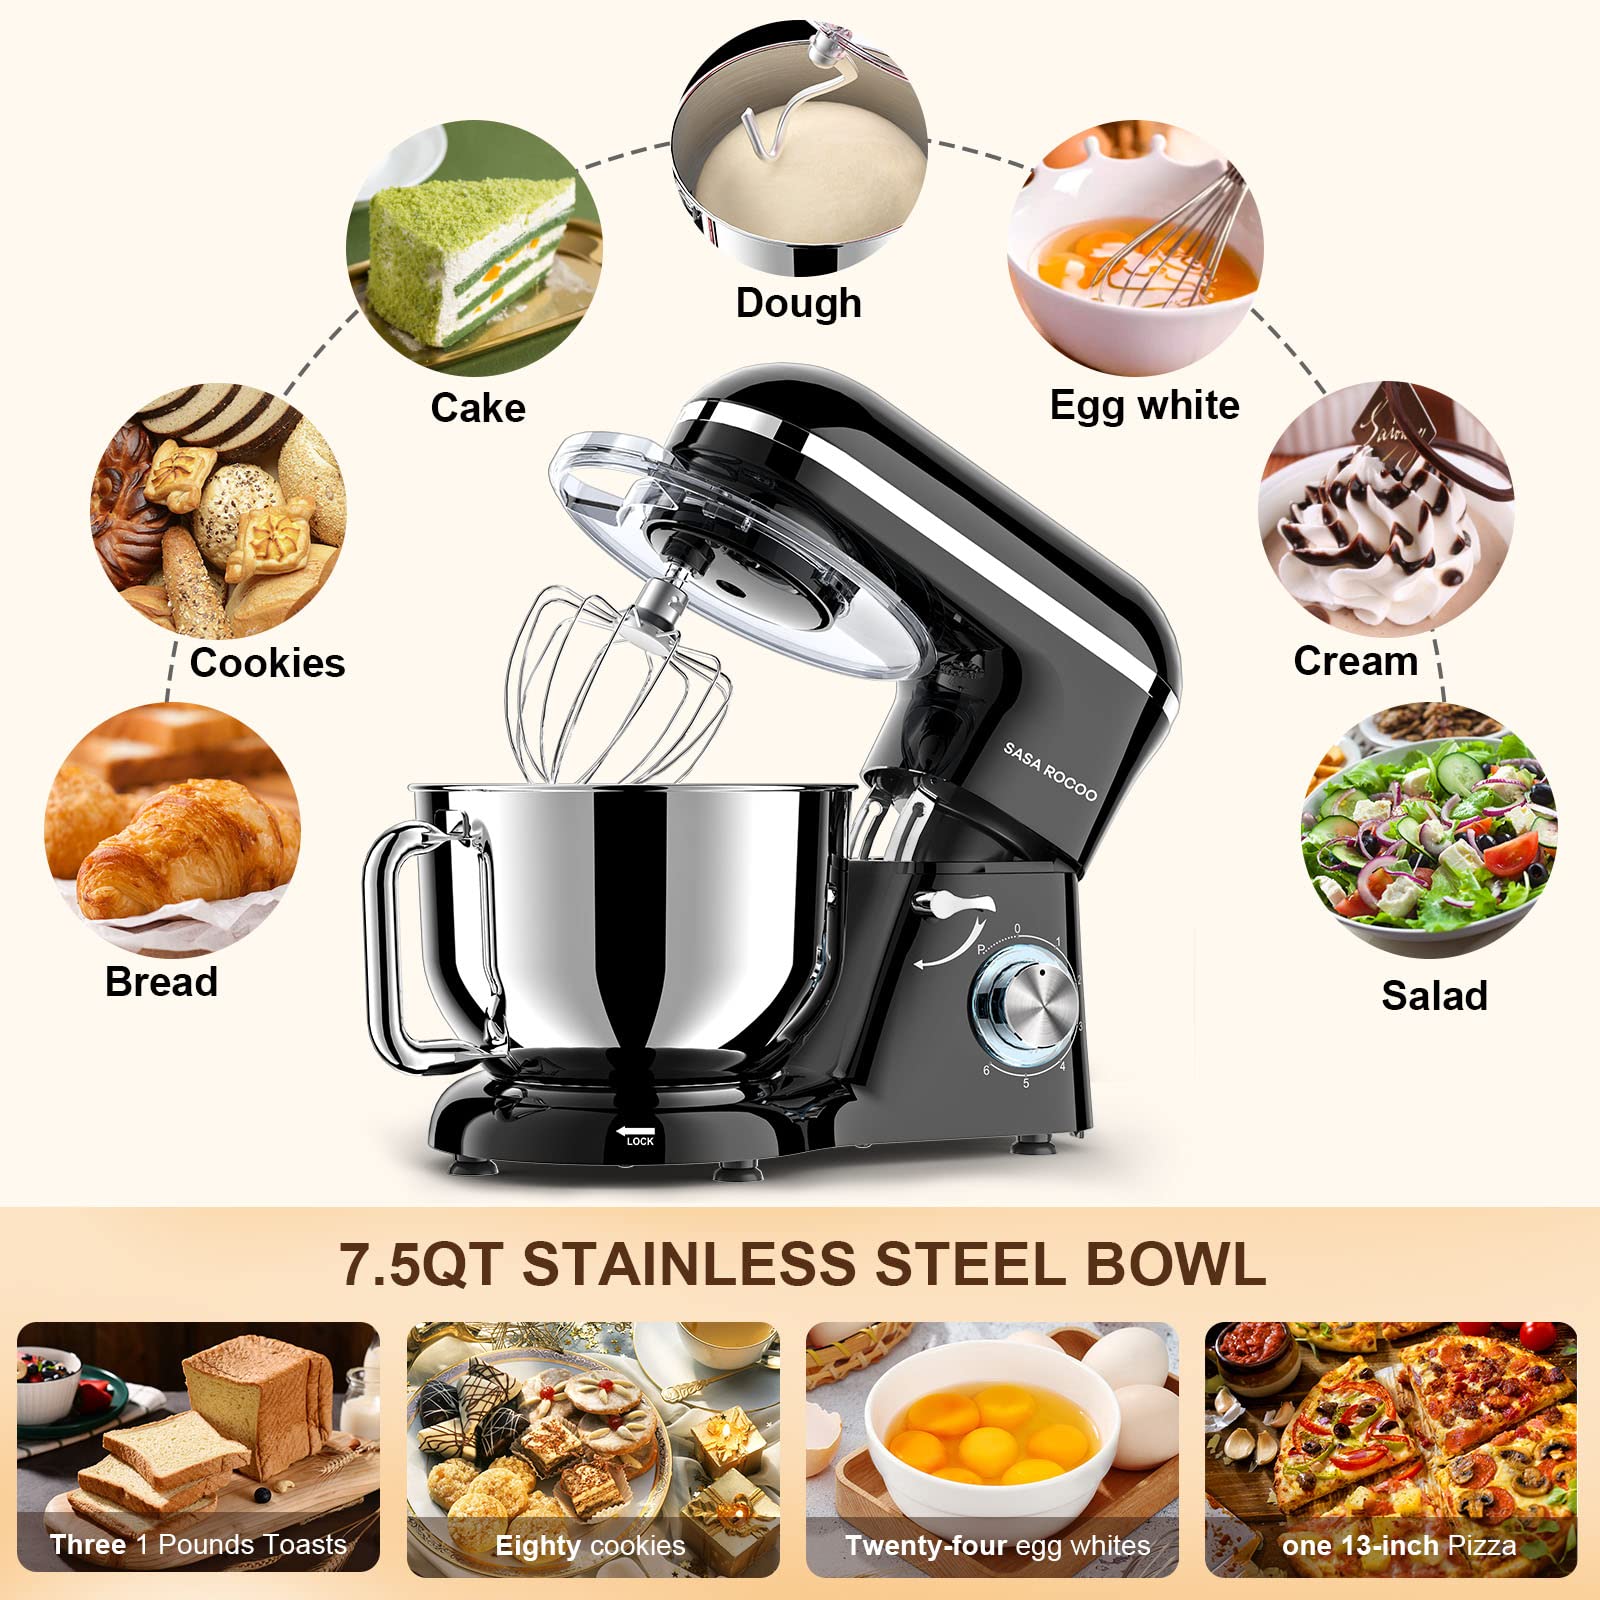 SASA ROCOO Stand Mixer 660W 6+P Speed Tilt-Head Electric Kitchen Mixer with 7.5 Qt Stainless Steel Bowl, Beater, Dough Hook, Whisk, Beater for Baking, Bagel, Cake, Pizza，Dishwasher Safe (black)